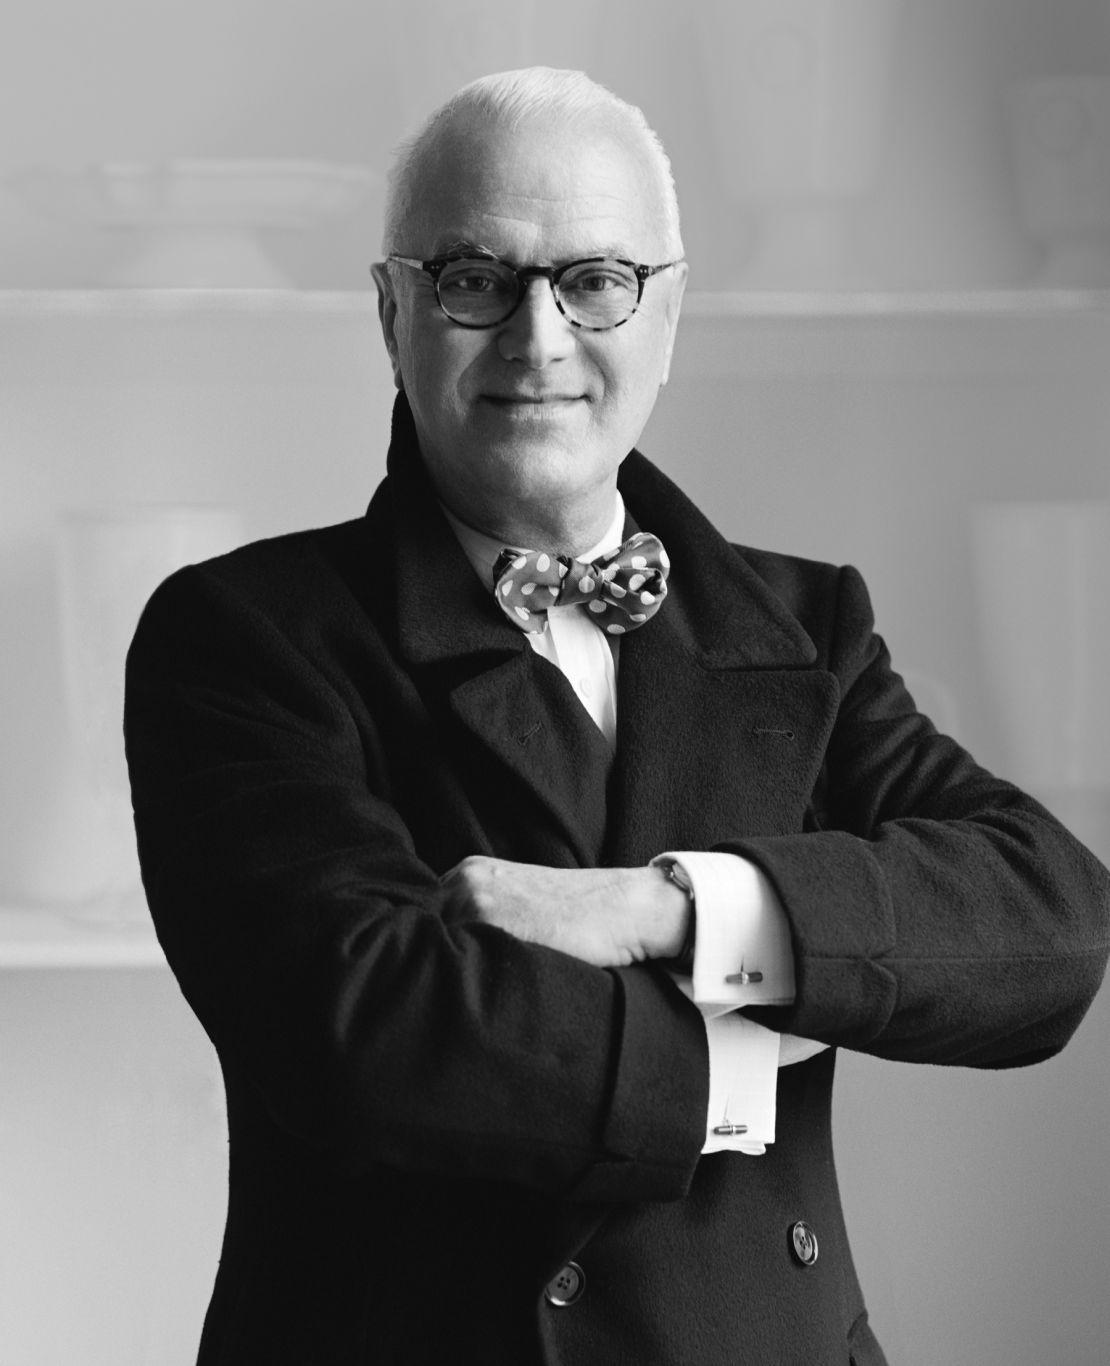 Spaniard Manolo Blahnik is the designer and founder of the eponymous luxury shoe brand. 